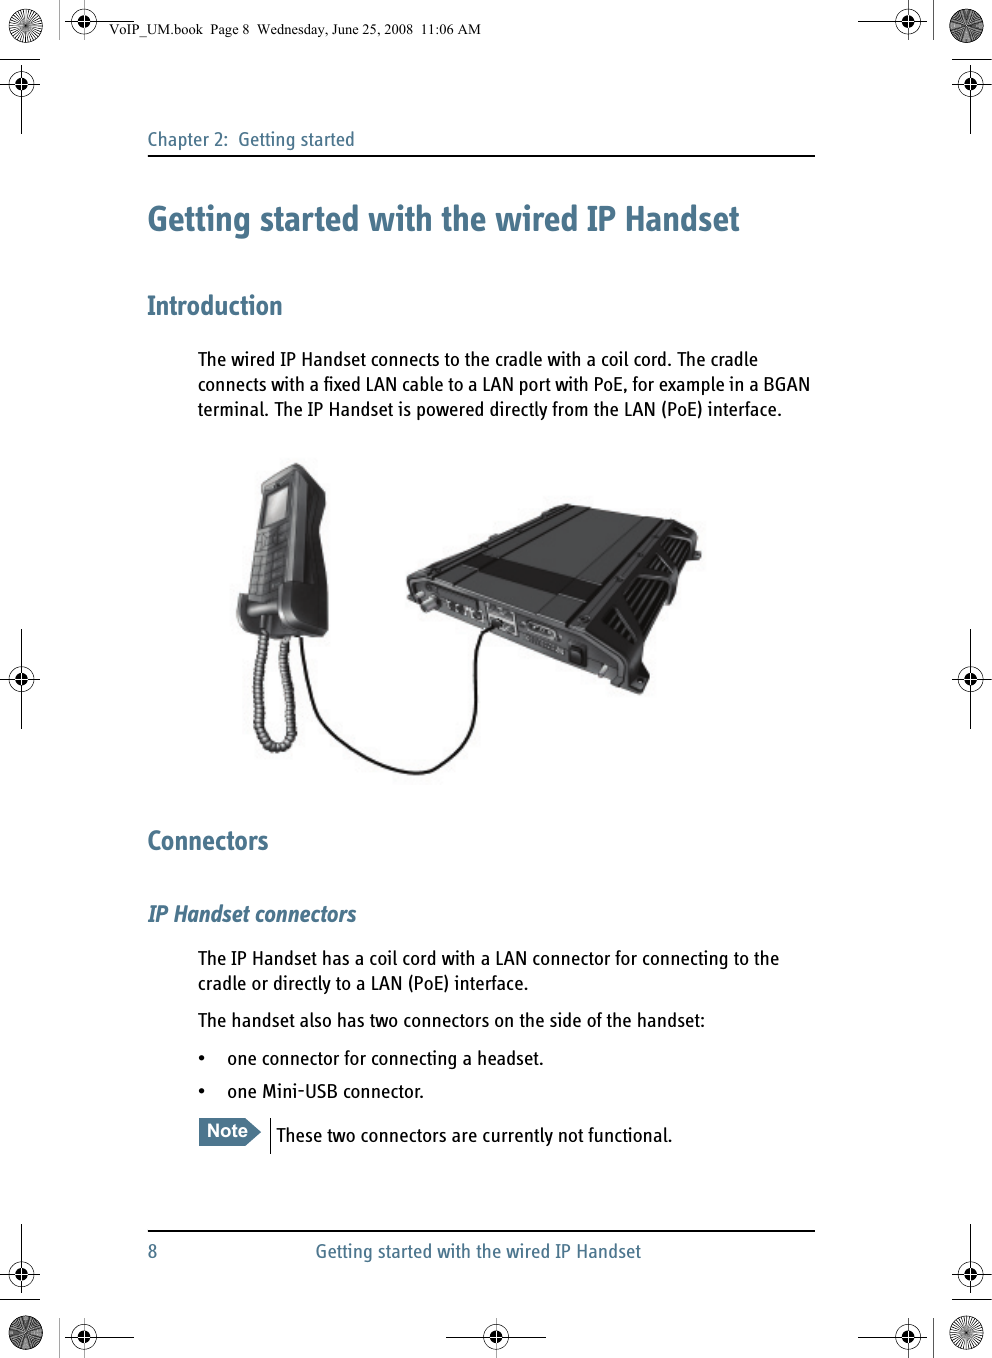 Chapter 2:  Getting started8 Getting started with the wired IP HandsetGetting started with the wired IP HandsetIntroductionThe wired IP Handset connects to the cradle with a coil cord. The cradle connects with a fixed LAN cable to a LAN port with PoE, for example in a BGAN terminal. The IP Handset is powered directly from the LAN (PoE) interface.ConnectorsIP Handset connectorsThe IP Handset has a coil cord with a LAN connector for connecting to the cradle or directly to a LAN (PoE) interface.The handset also has two connectors on the side of the handset:• one connector for connecting a headset.• one Mini-USB connector.Note These two connectors are currently not functional.VoIP_UM.book  Page 8  Wednesday, June 25, 2008  11:06 AM